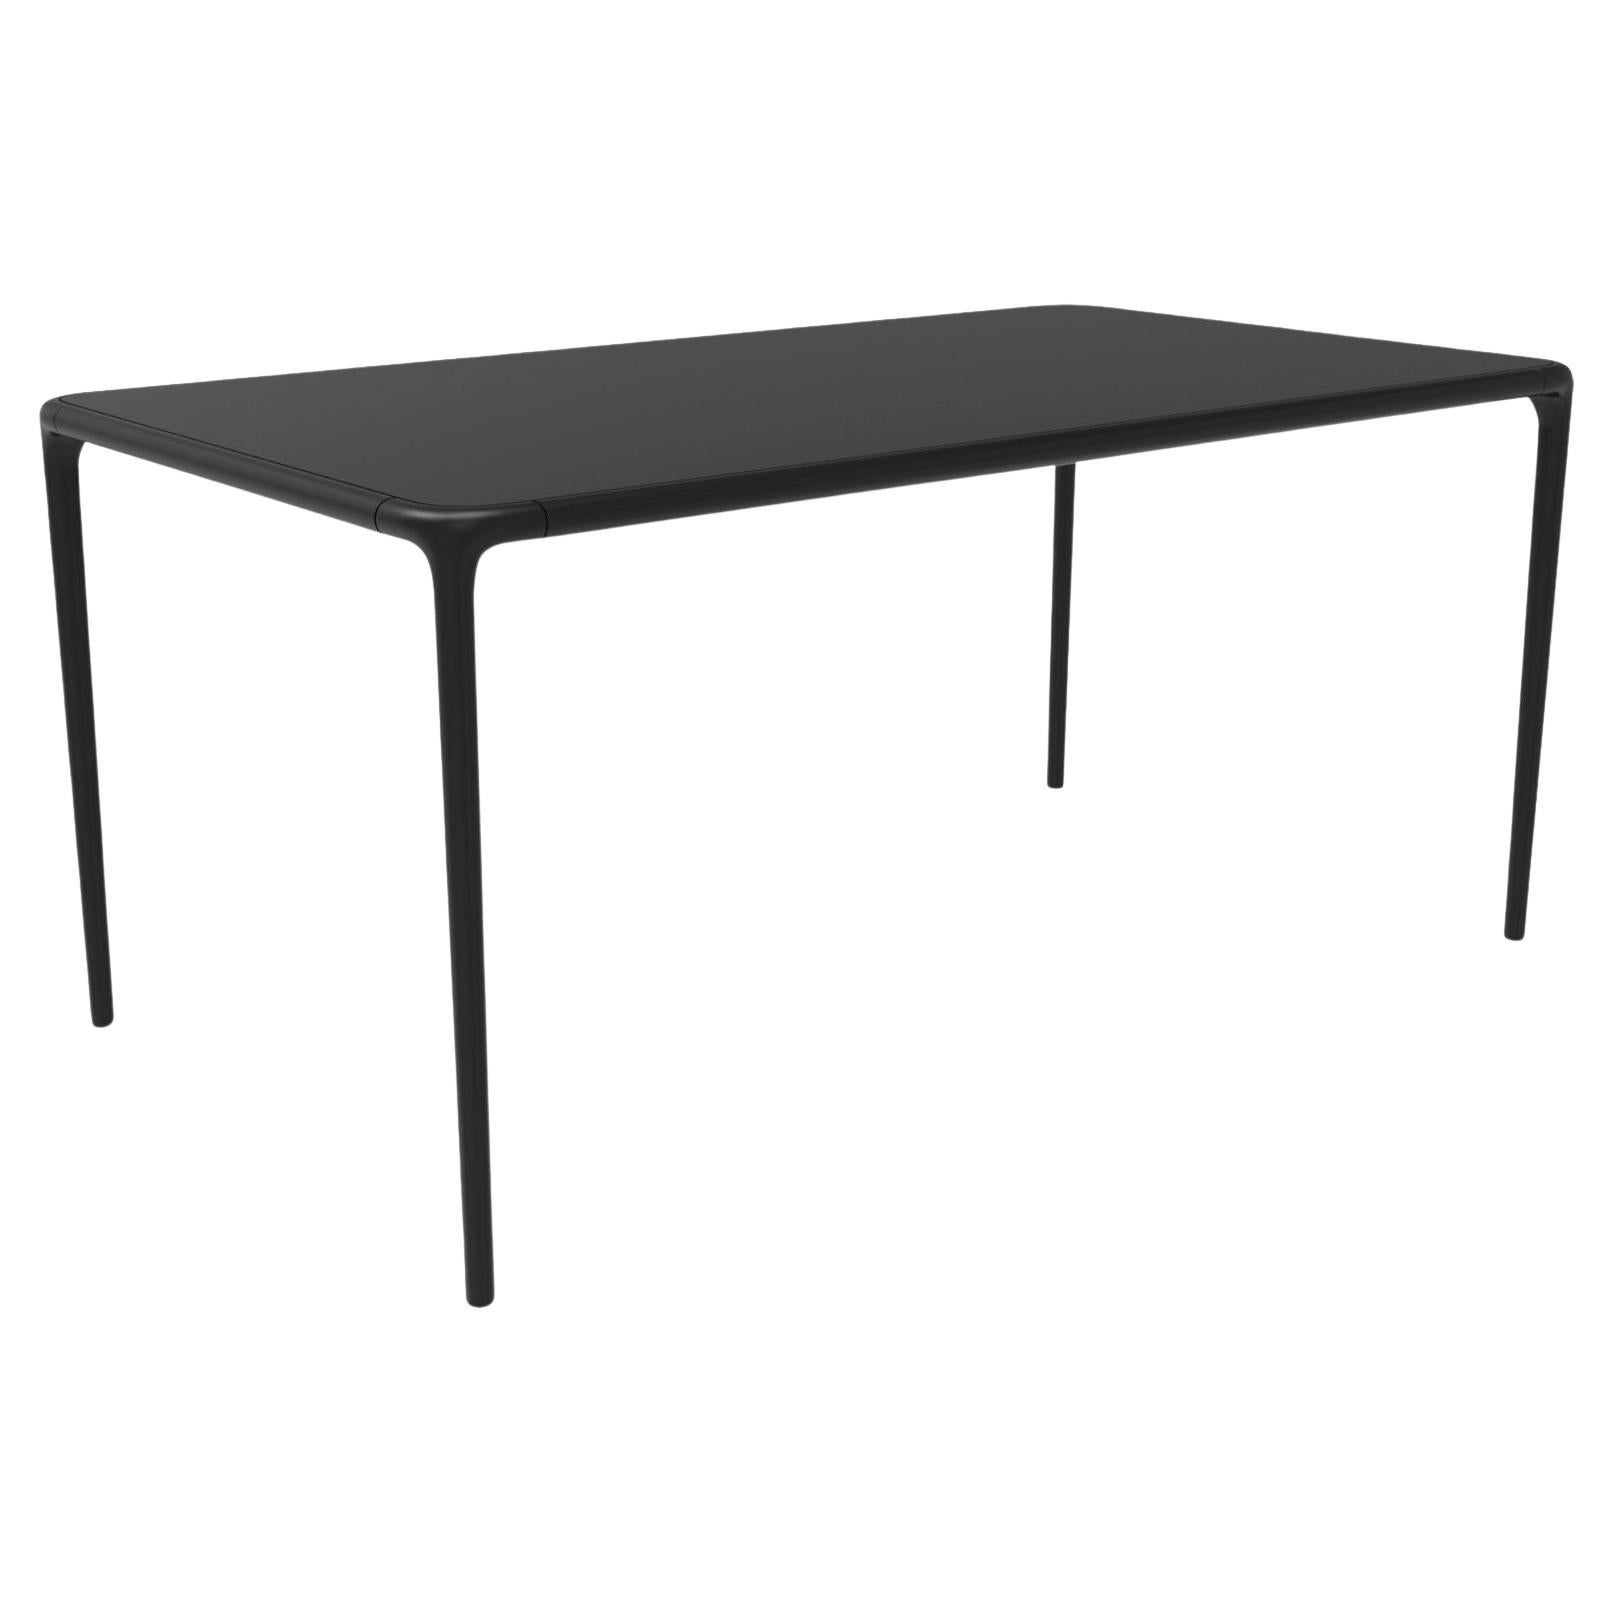 Xaloc Black Glass Top Table 160 by Mowee For Sale